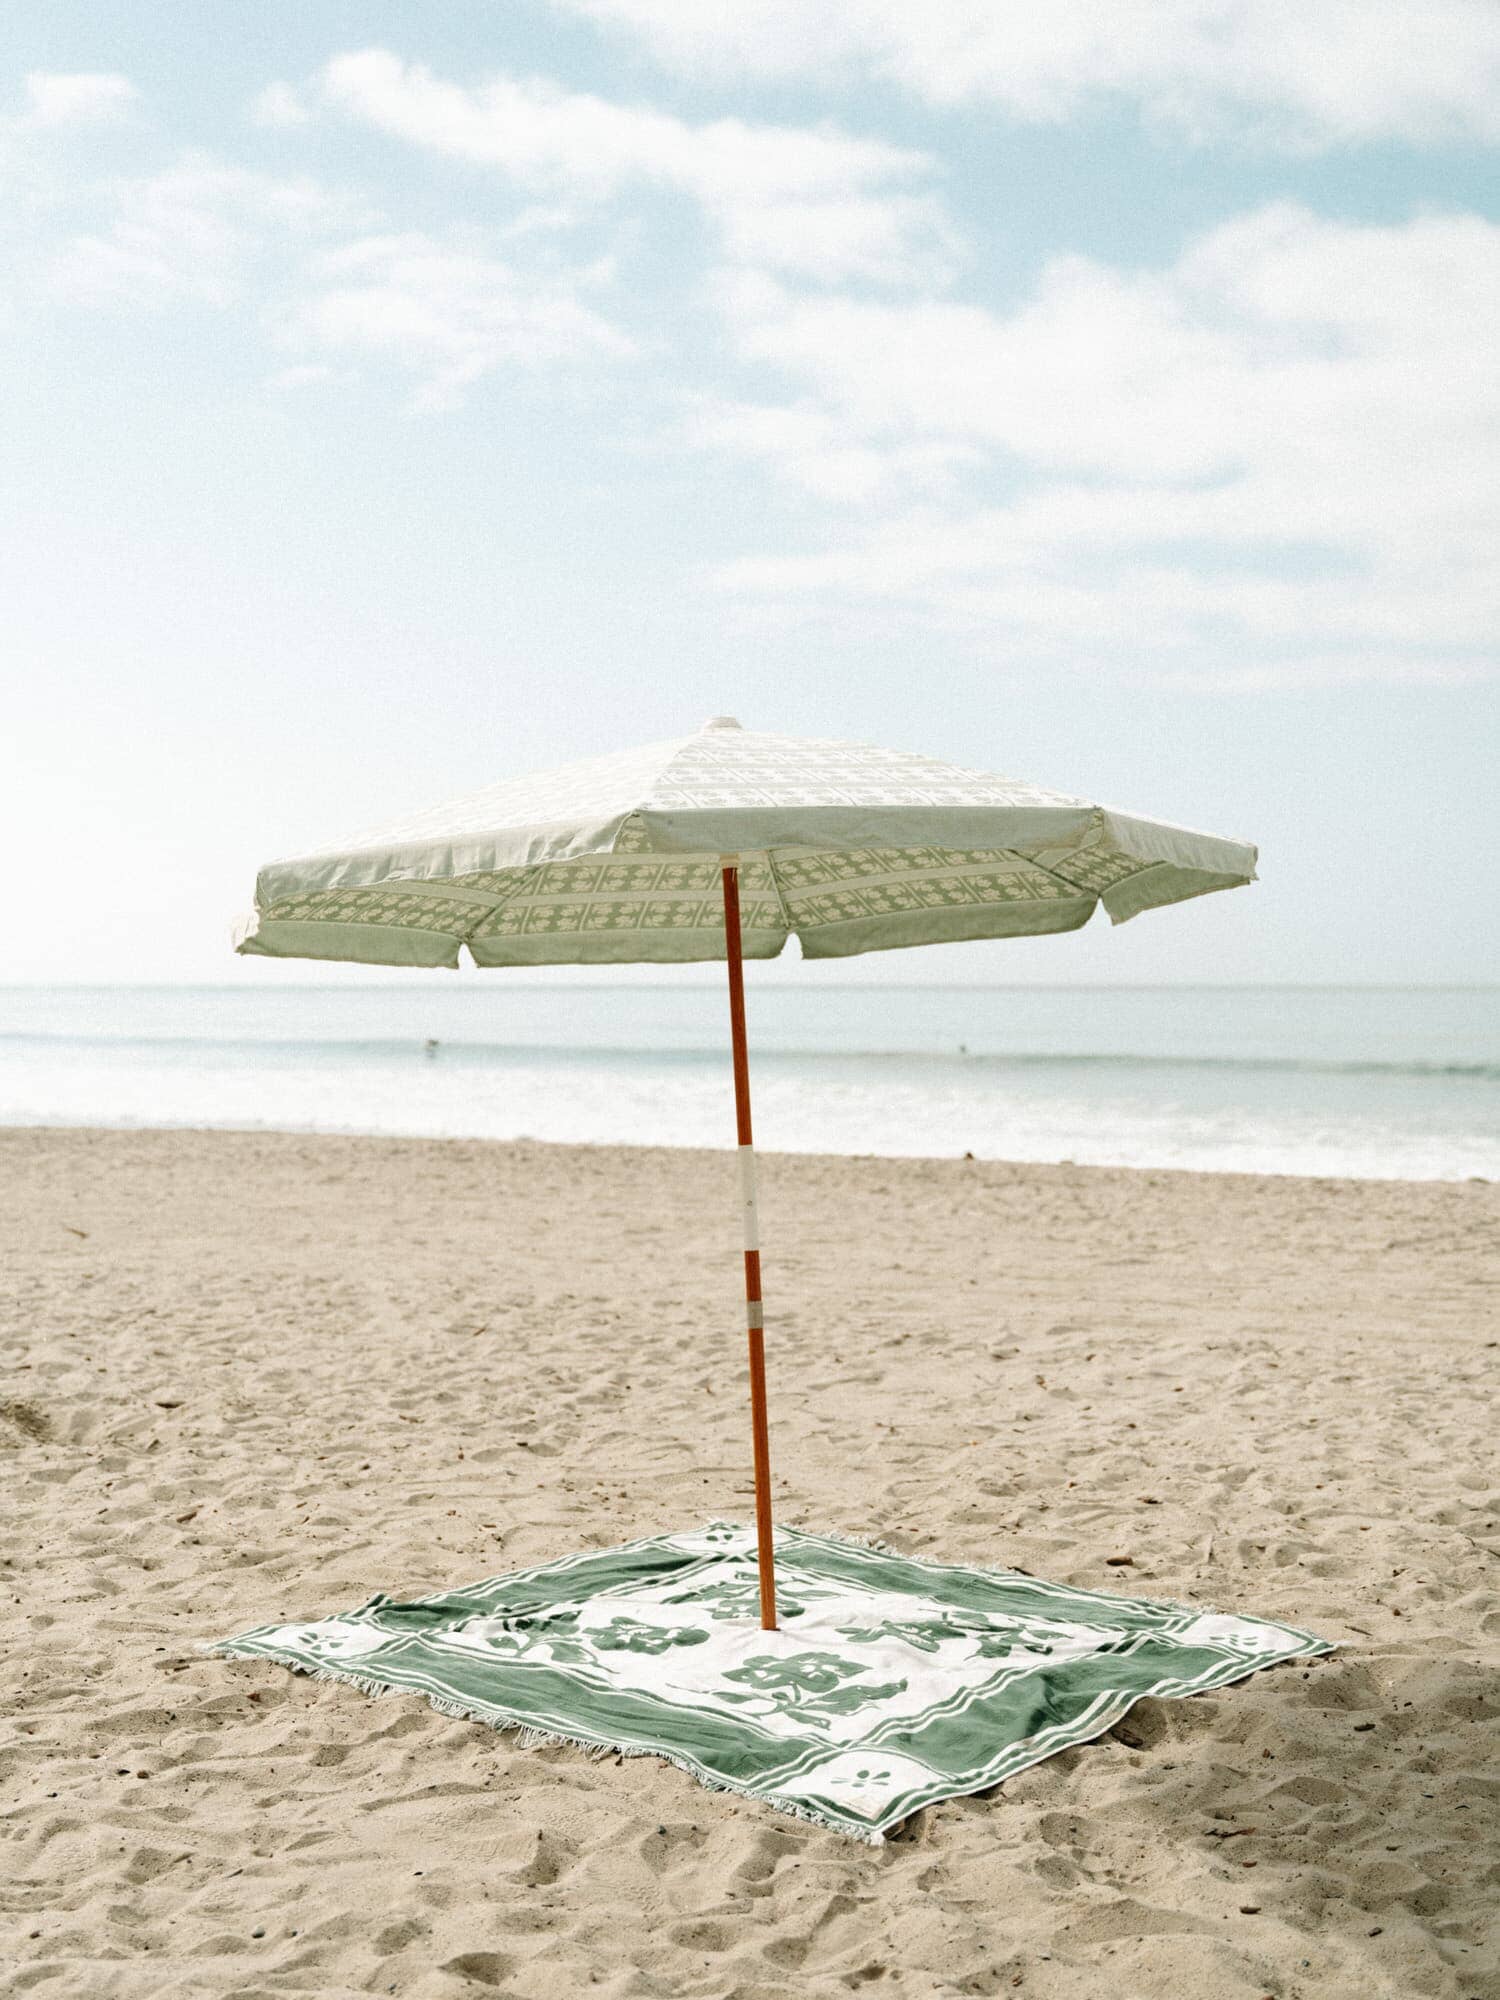 Beach setting with umbrella and blanket